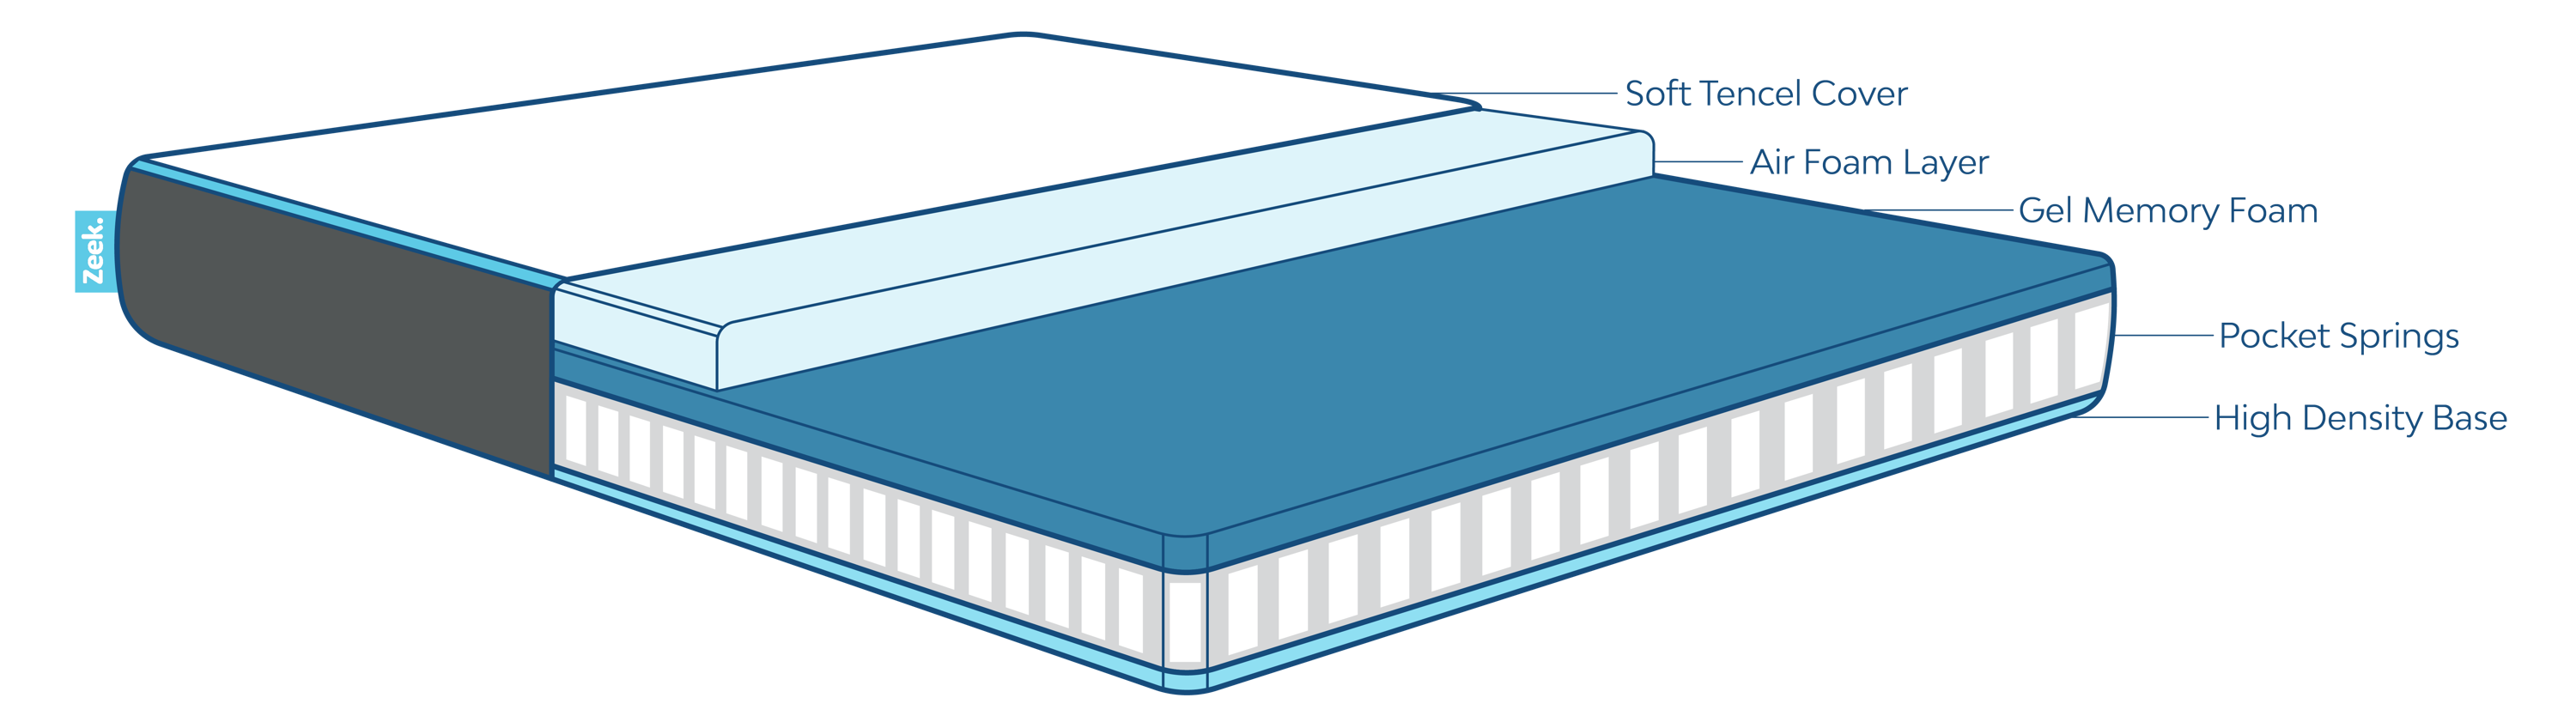 Hybrid Mattress in a box, best mattress in a box for side sleepers